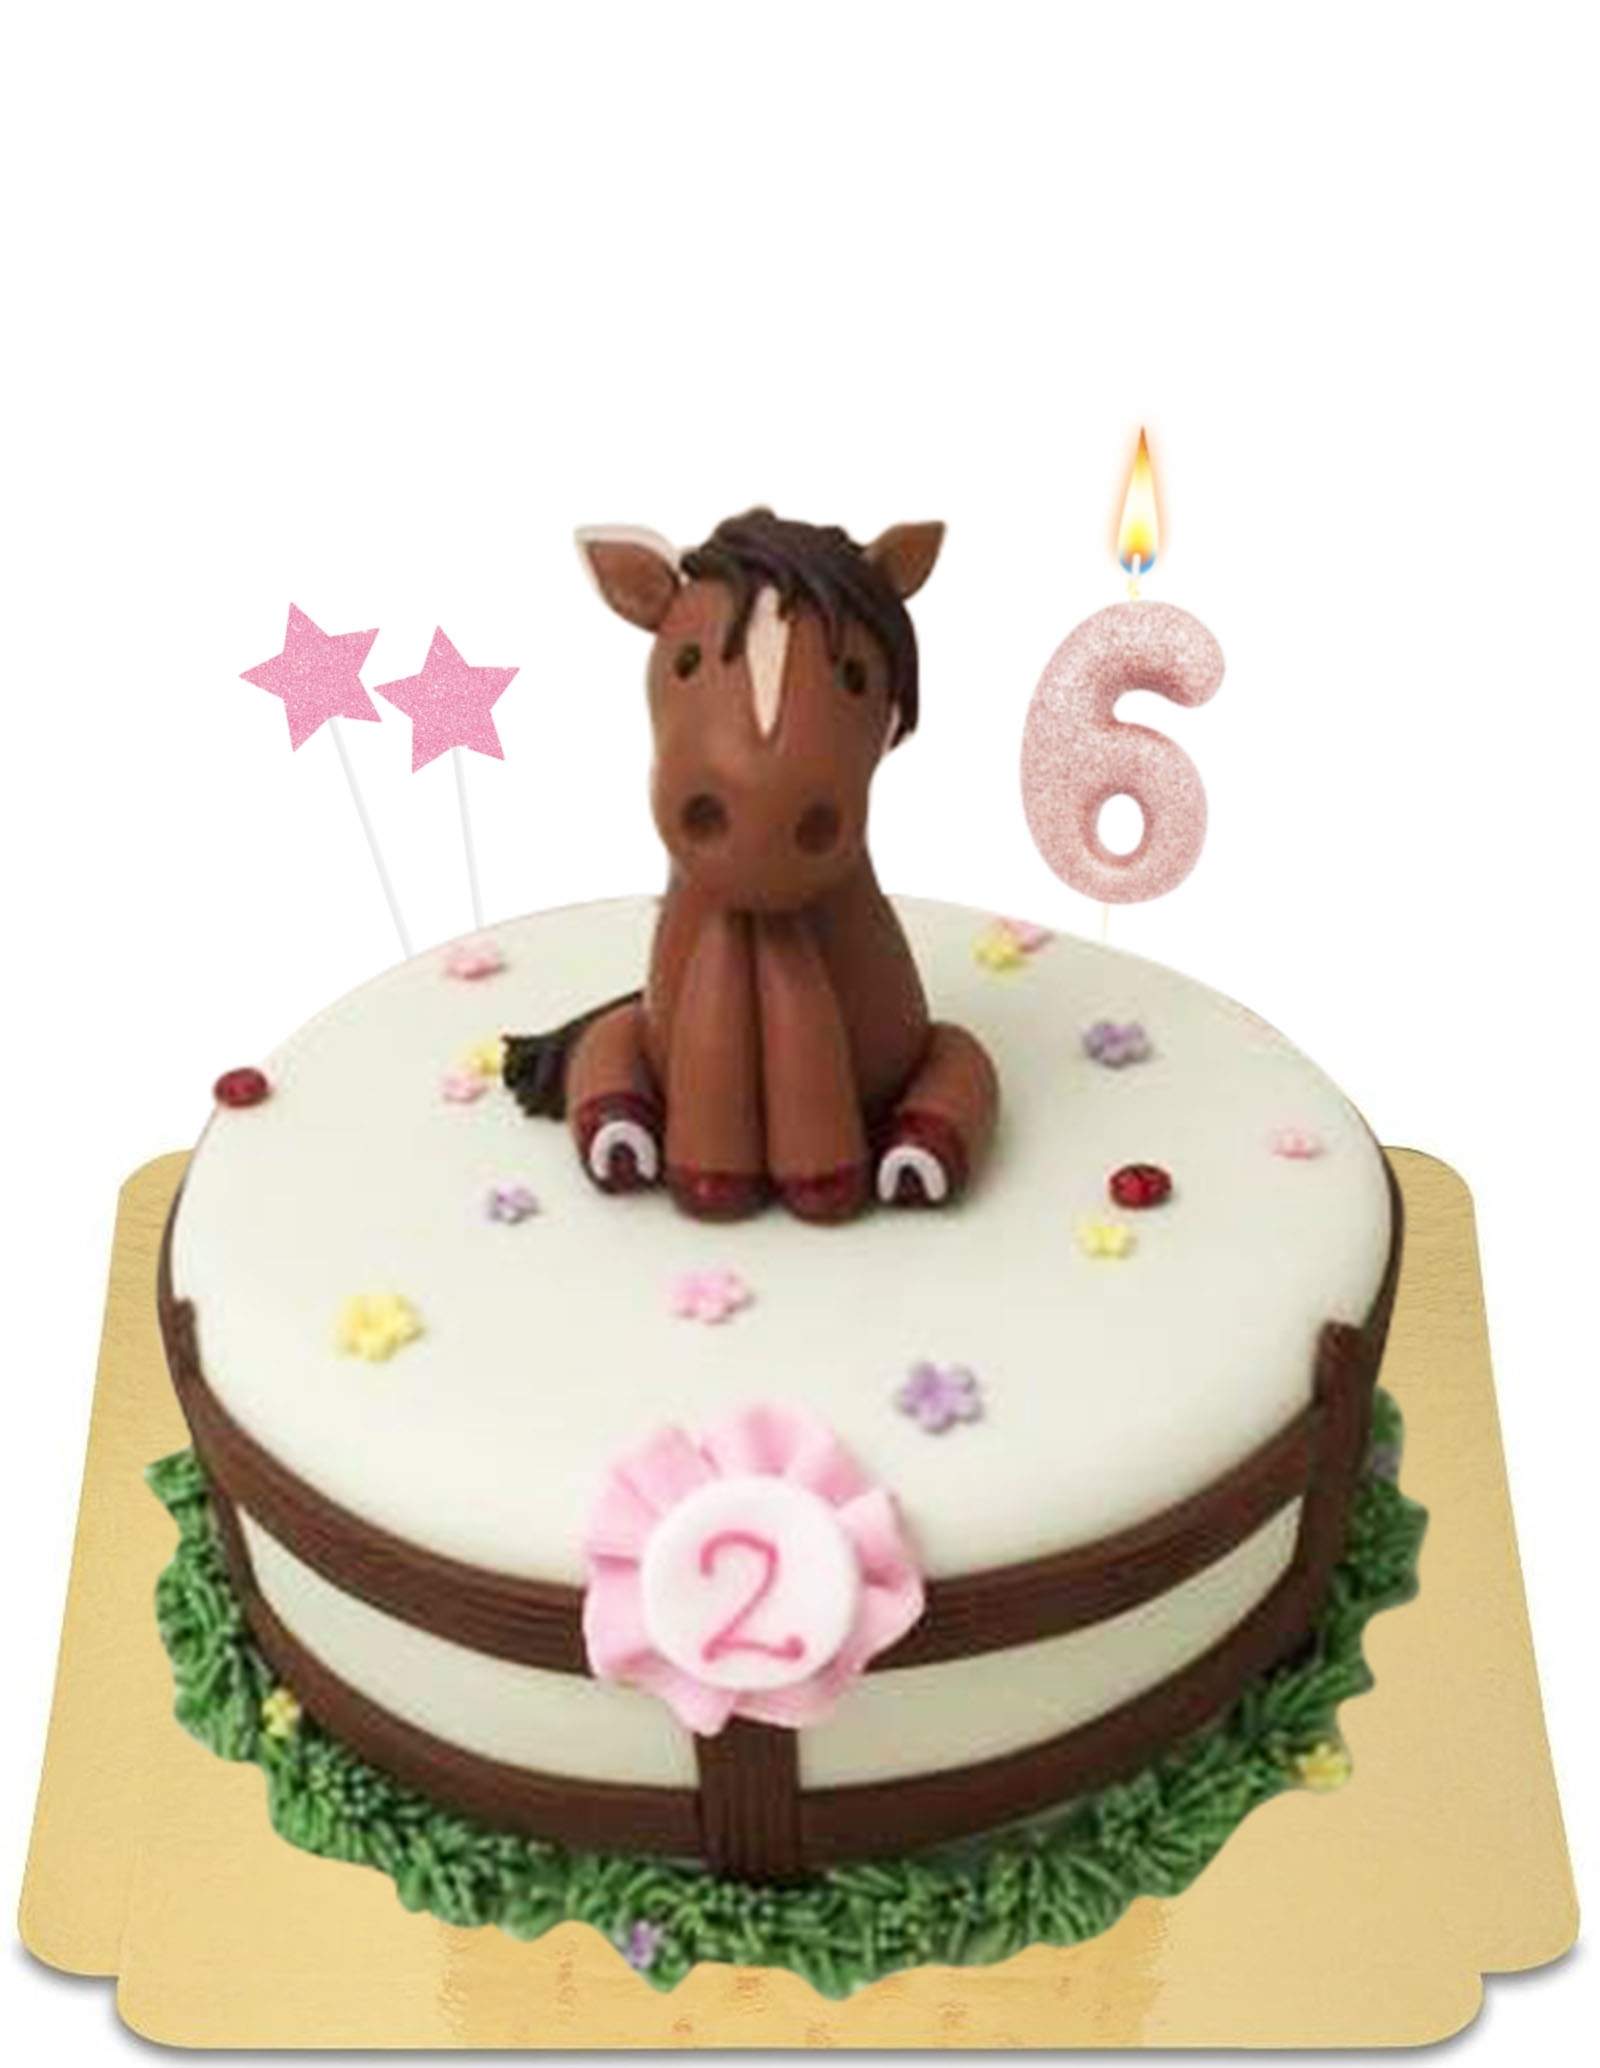 Horse Stable Cake - A bit of inspiration - Recipes of My Art